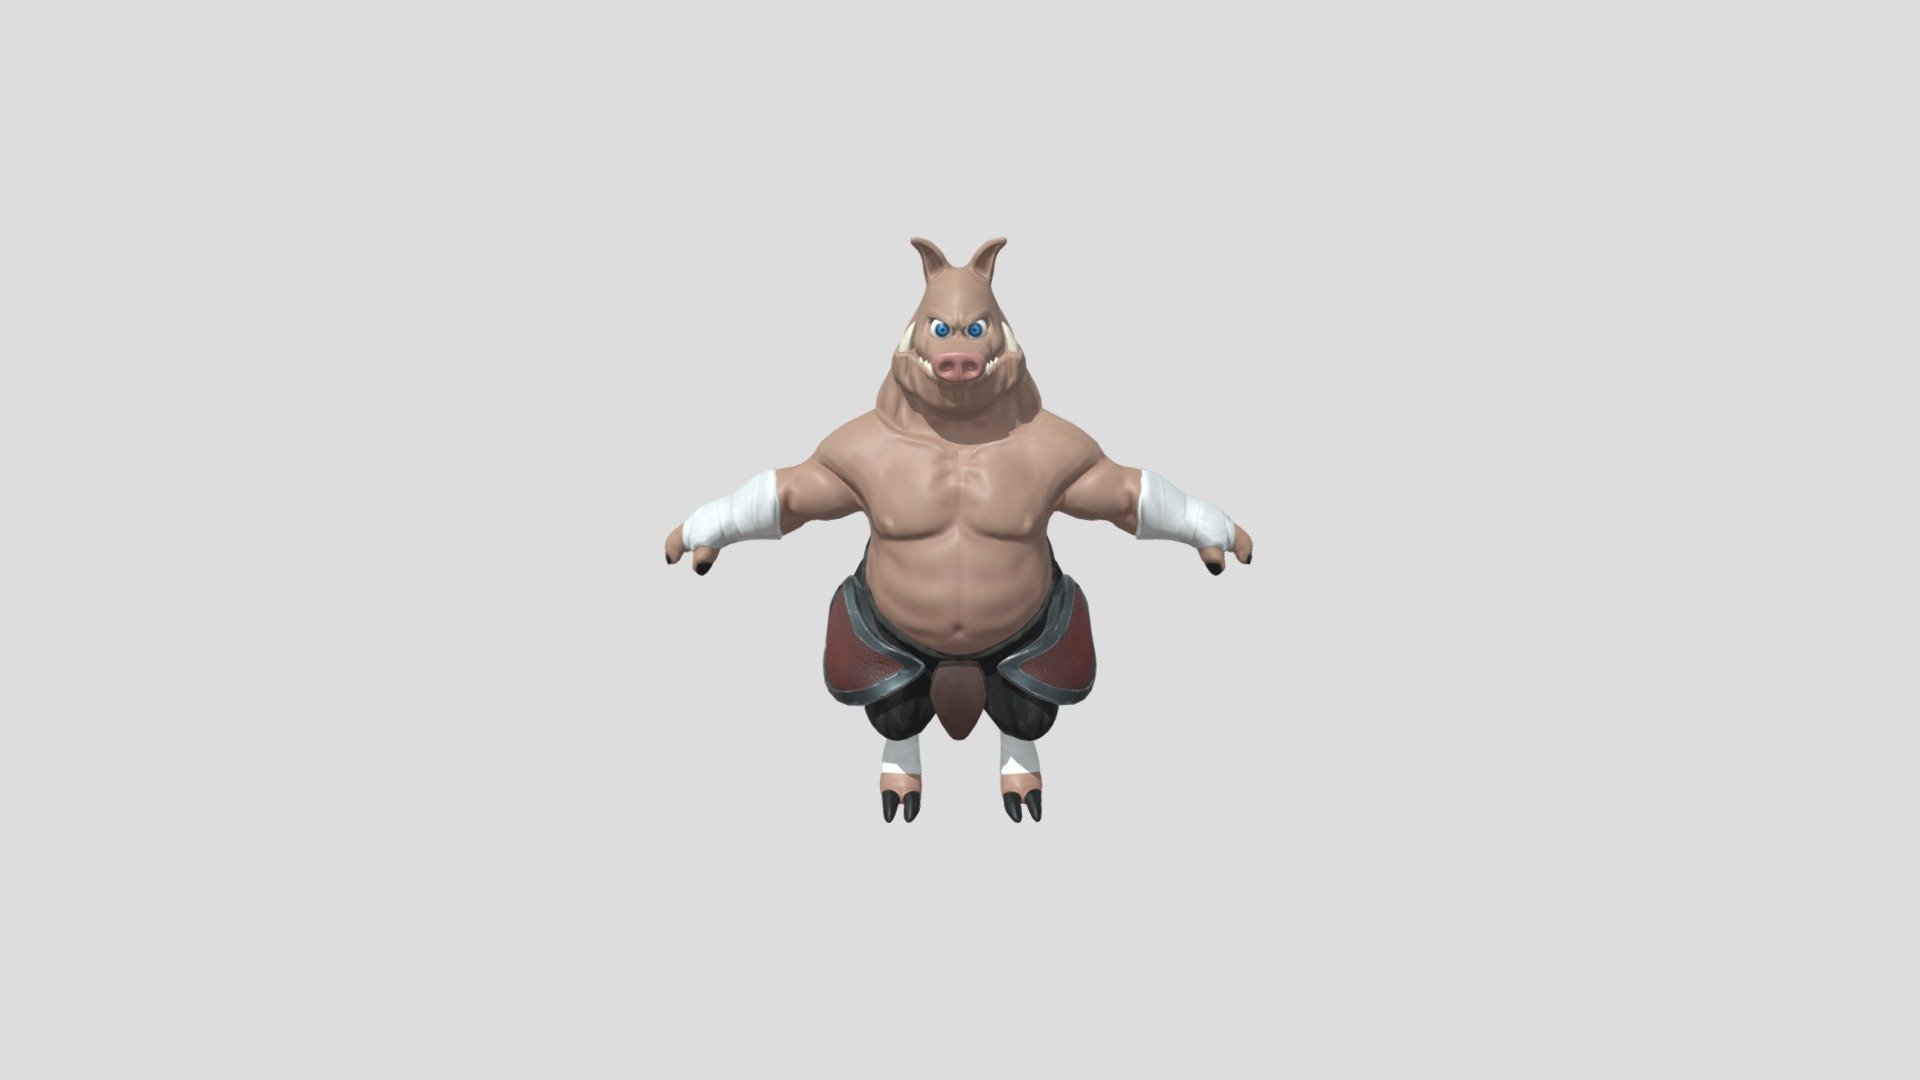 Pig warrior based on the dragon pig, from the Dofus/wakfu videogame and TV series. Not rigged.

Verts : 11.362
Faces : 11.404
Tris : 21.838

Model available in Artstation store:
https://www.artstation.com/a/19363102

More models in my Artstation : https://carlosheredia.artstation.com/ - Pig warrior - 3D model by cmhg19 3d model